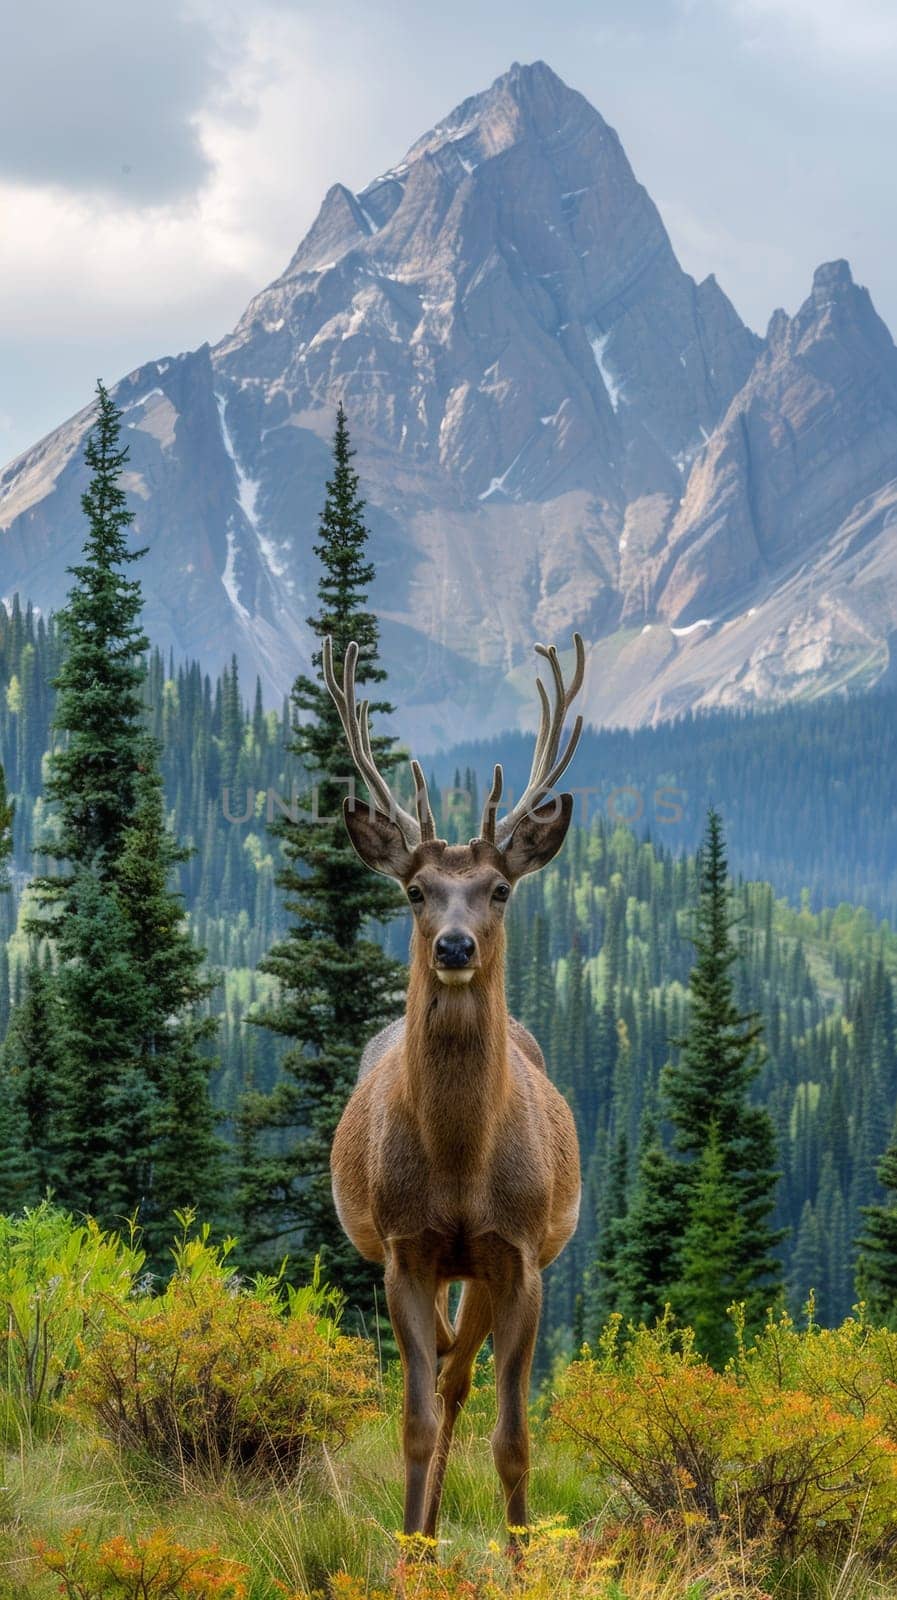 A deer standing in a field with mountains behind it